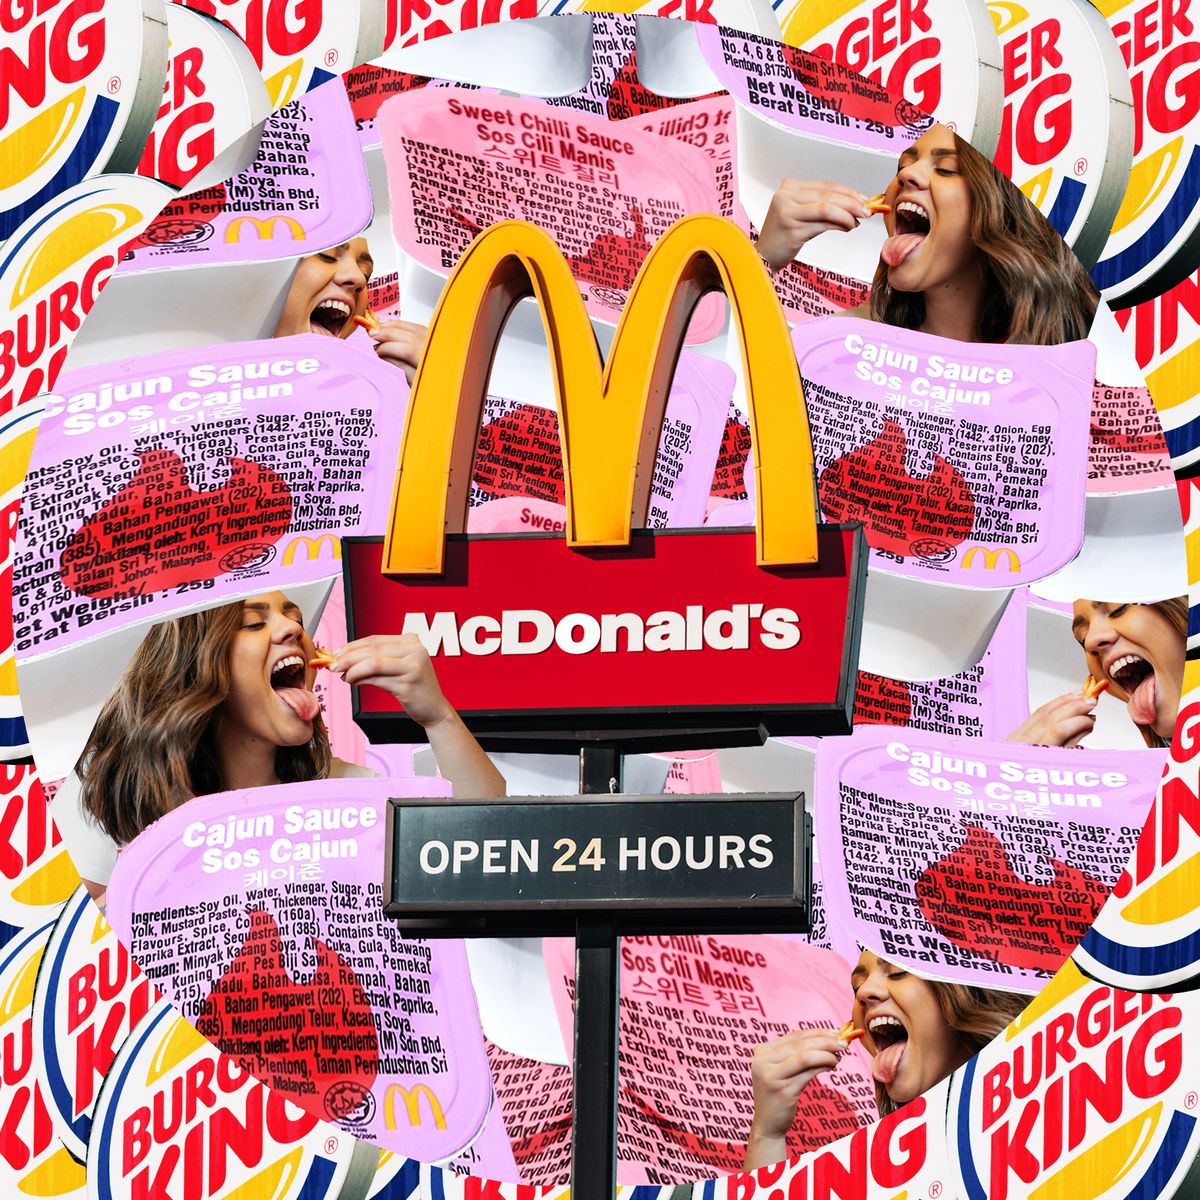 A kaleidoscopic collage centered around a McDonald’s road sign, pink packets of Cajun dipping sauce, a woman eating french fries, and the McDonald’s logo.